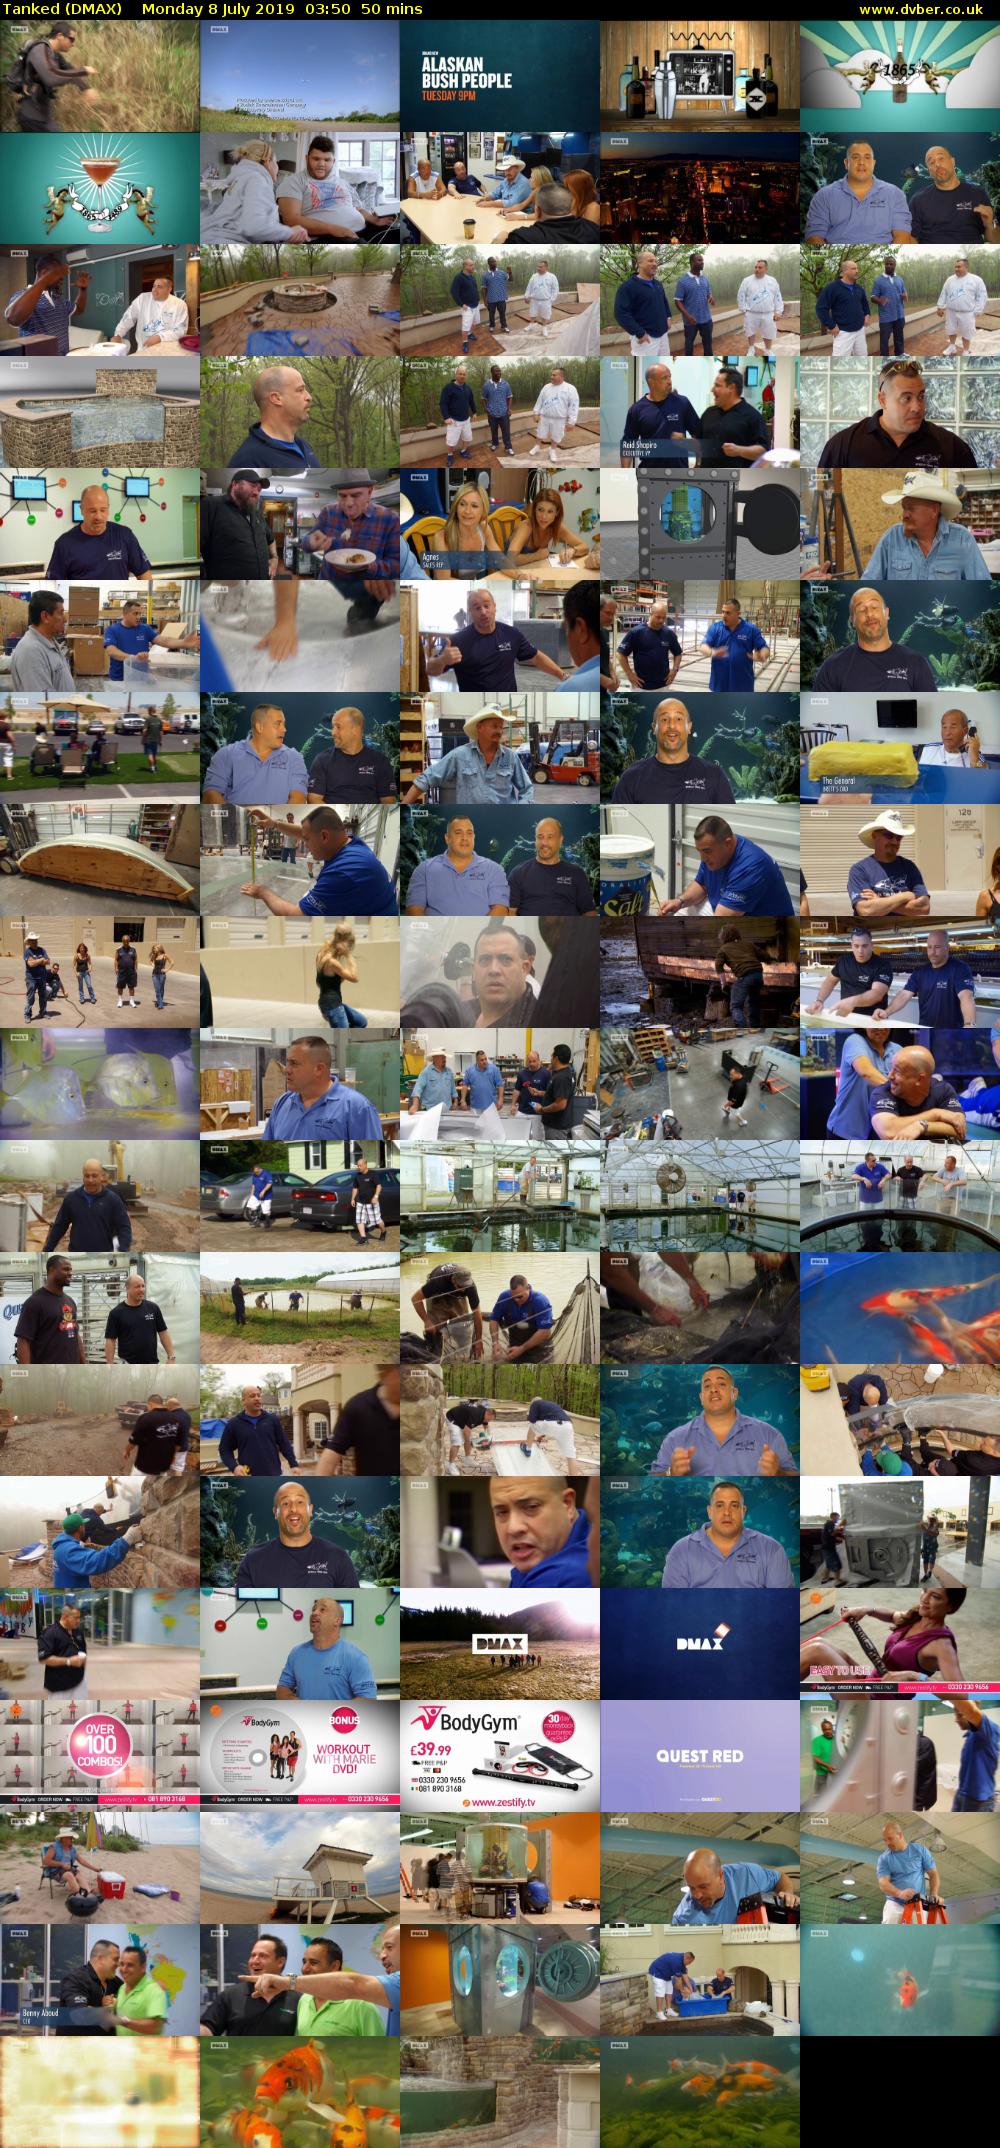 Tanked (DMAX) Monday 8 July 2019 03:50 - 04:40